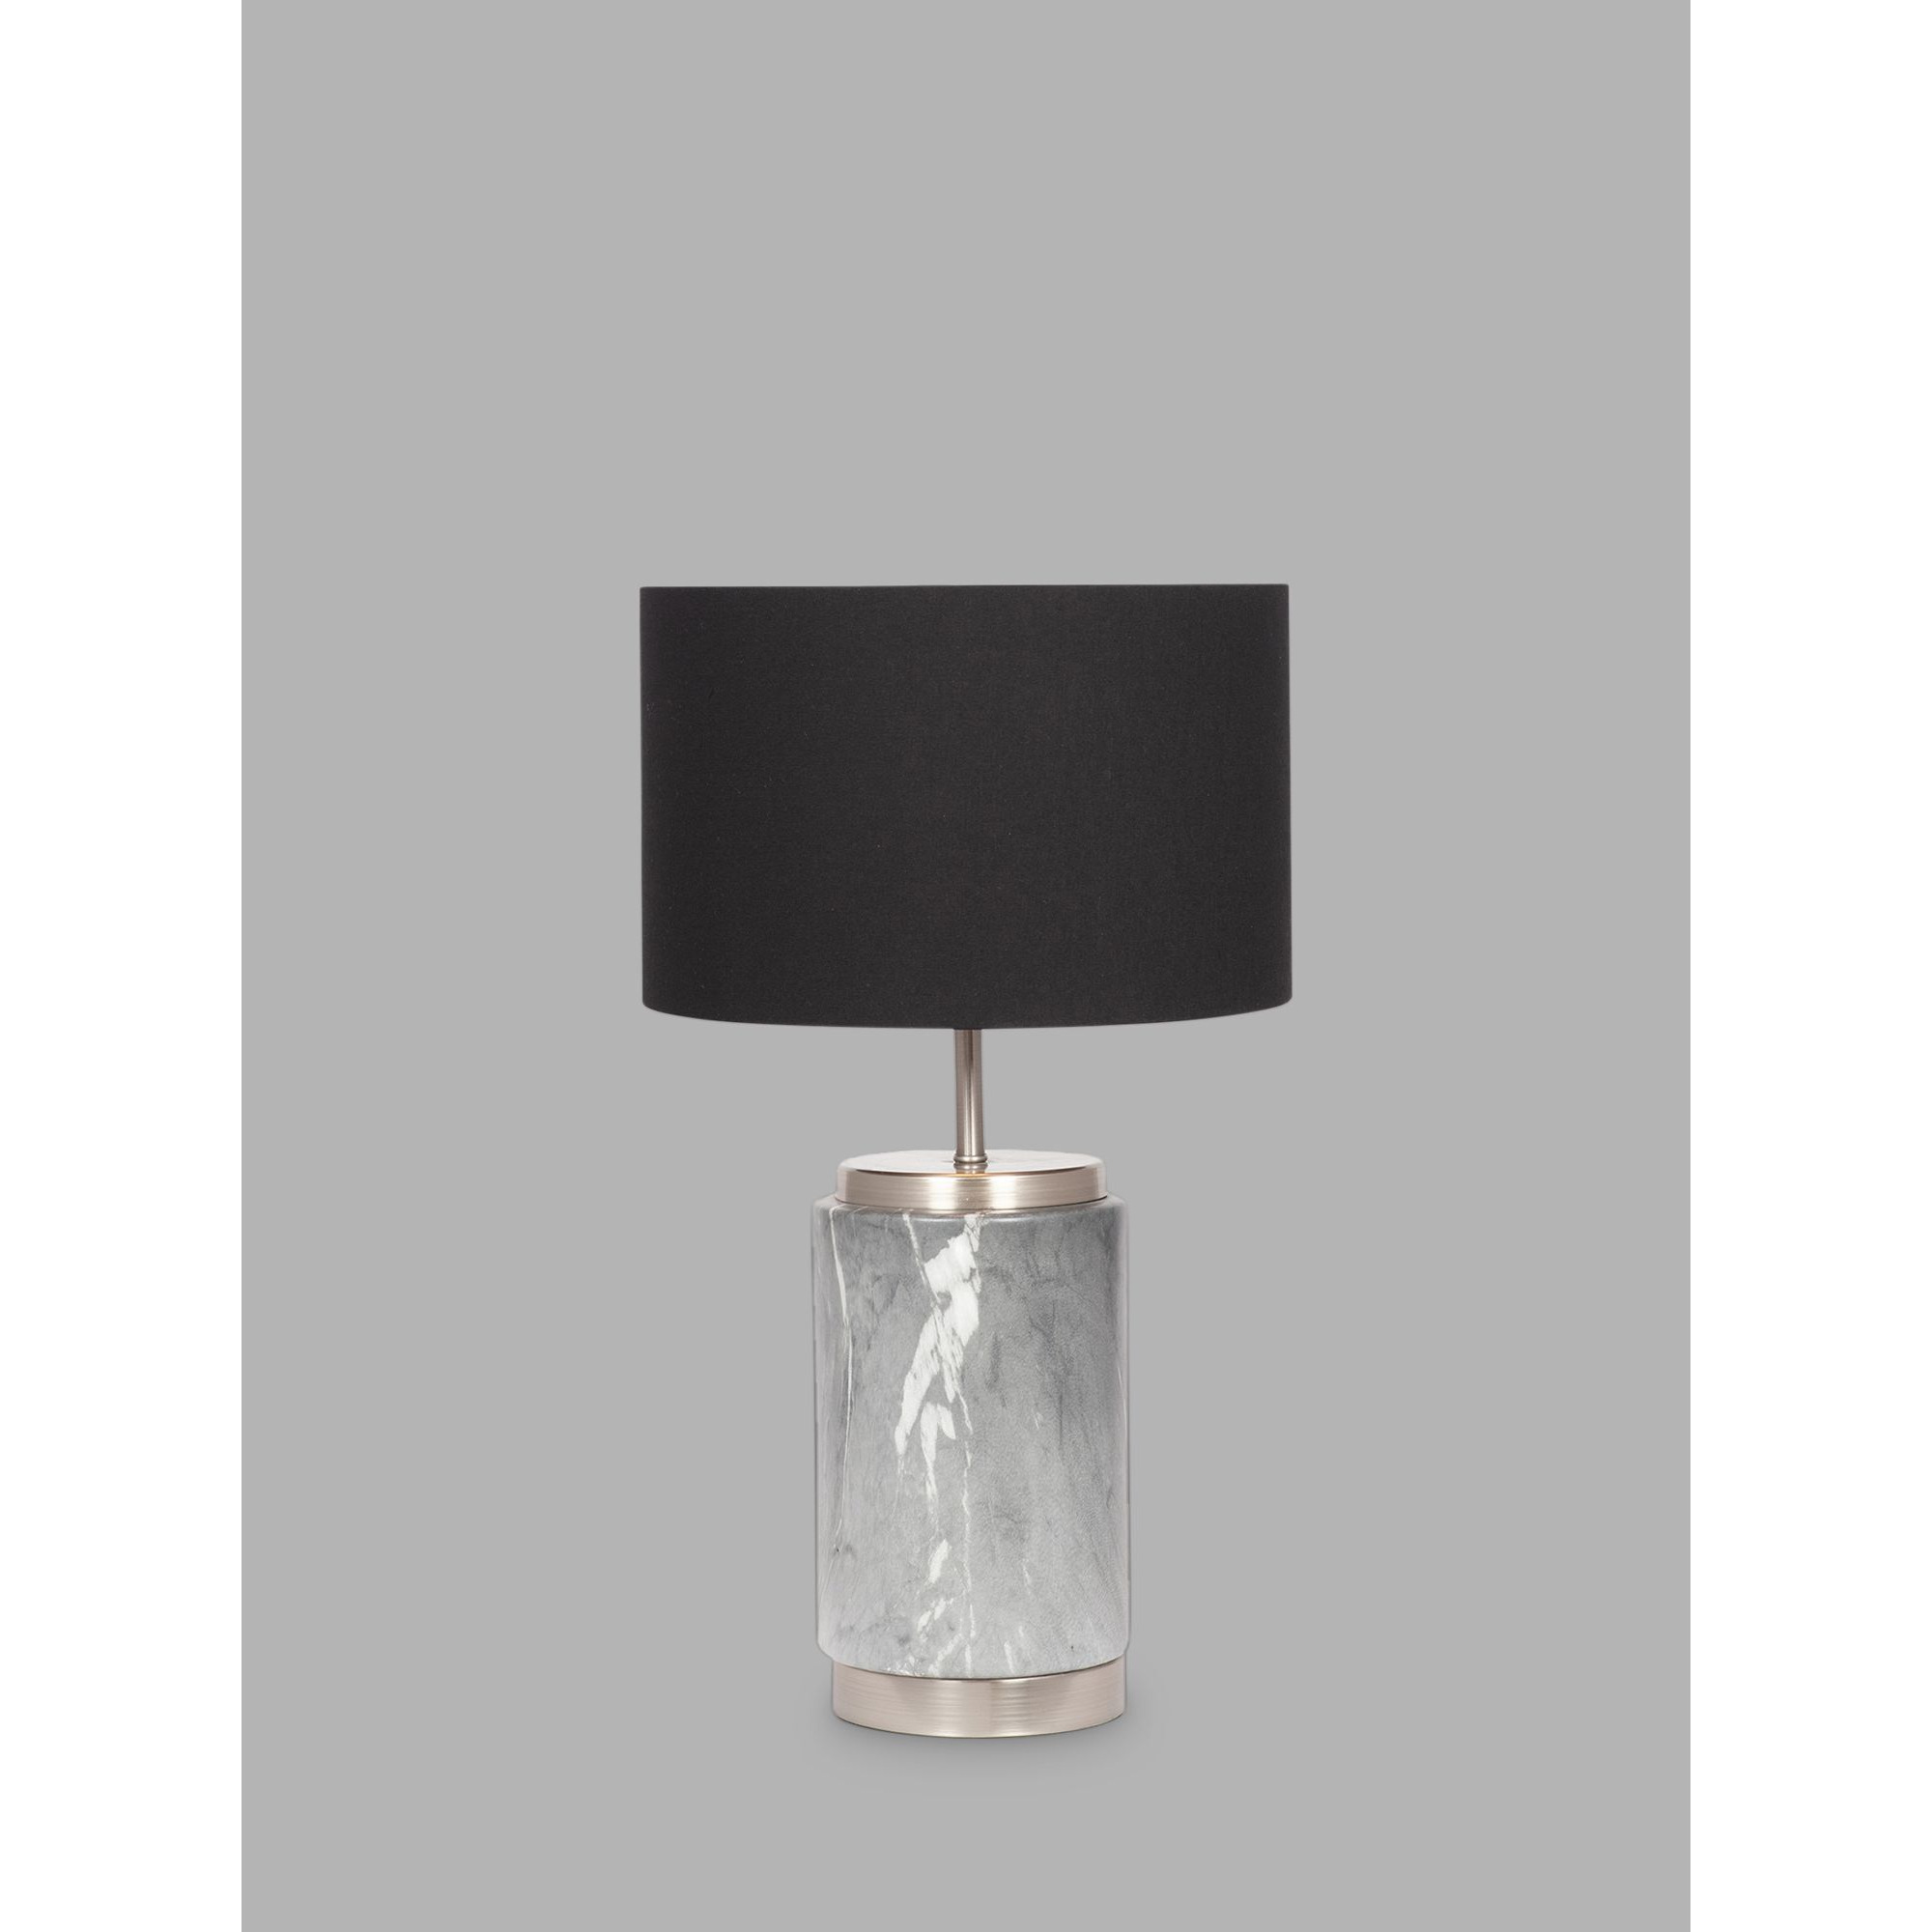 Pacific Lifestyle Mable Effect Table Lamp, Grey - image 1